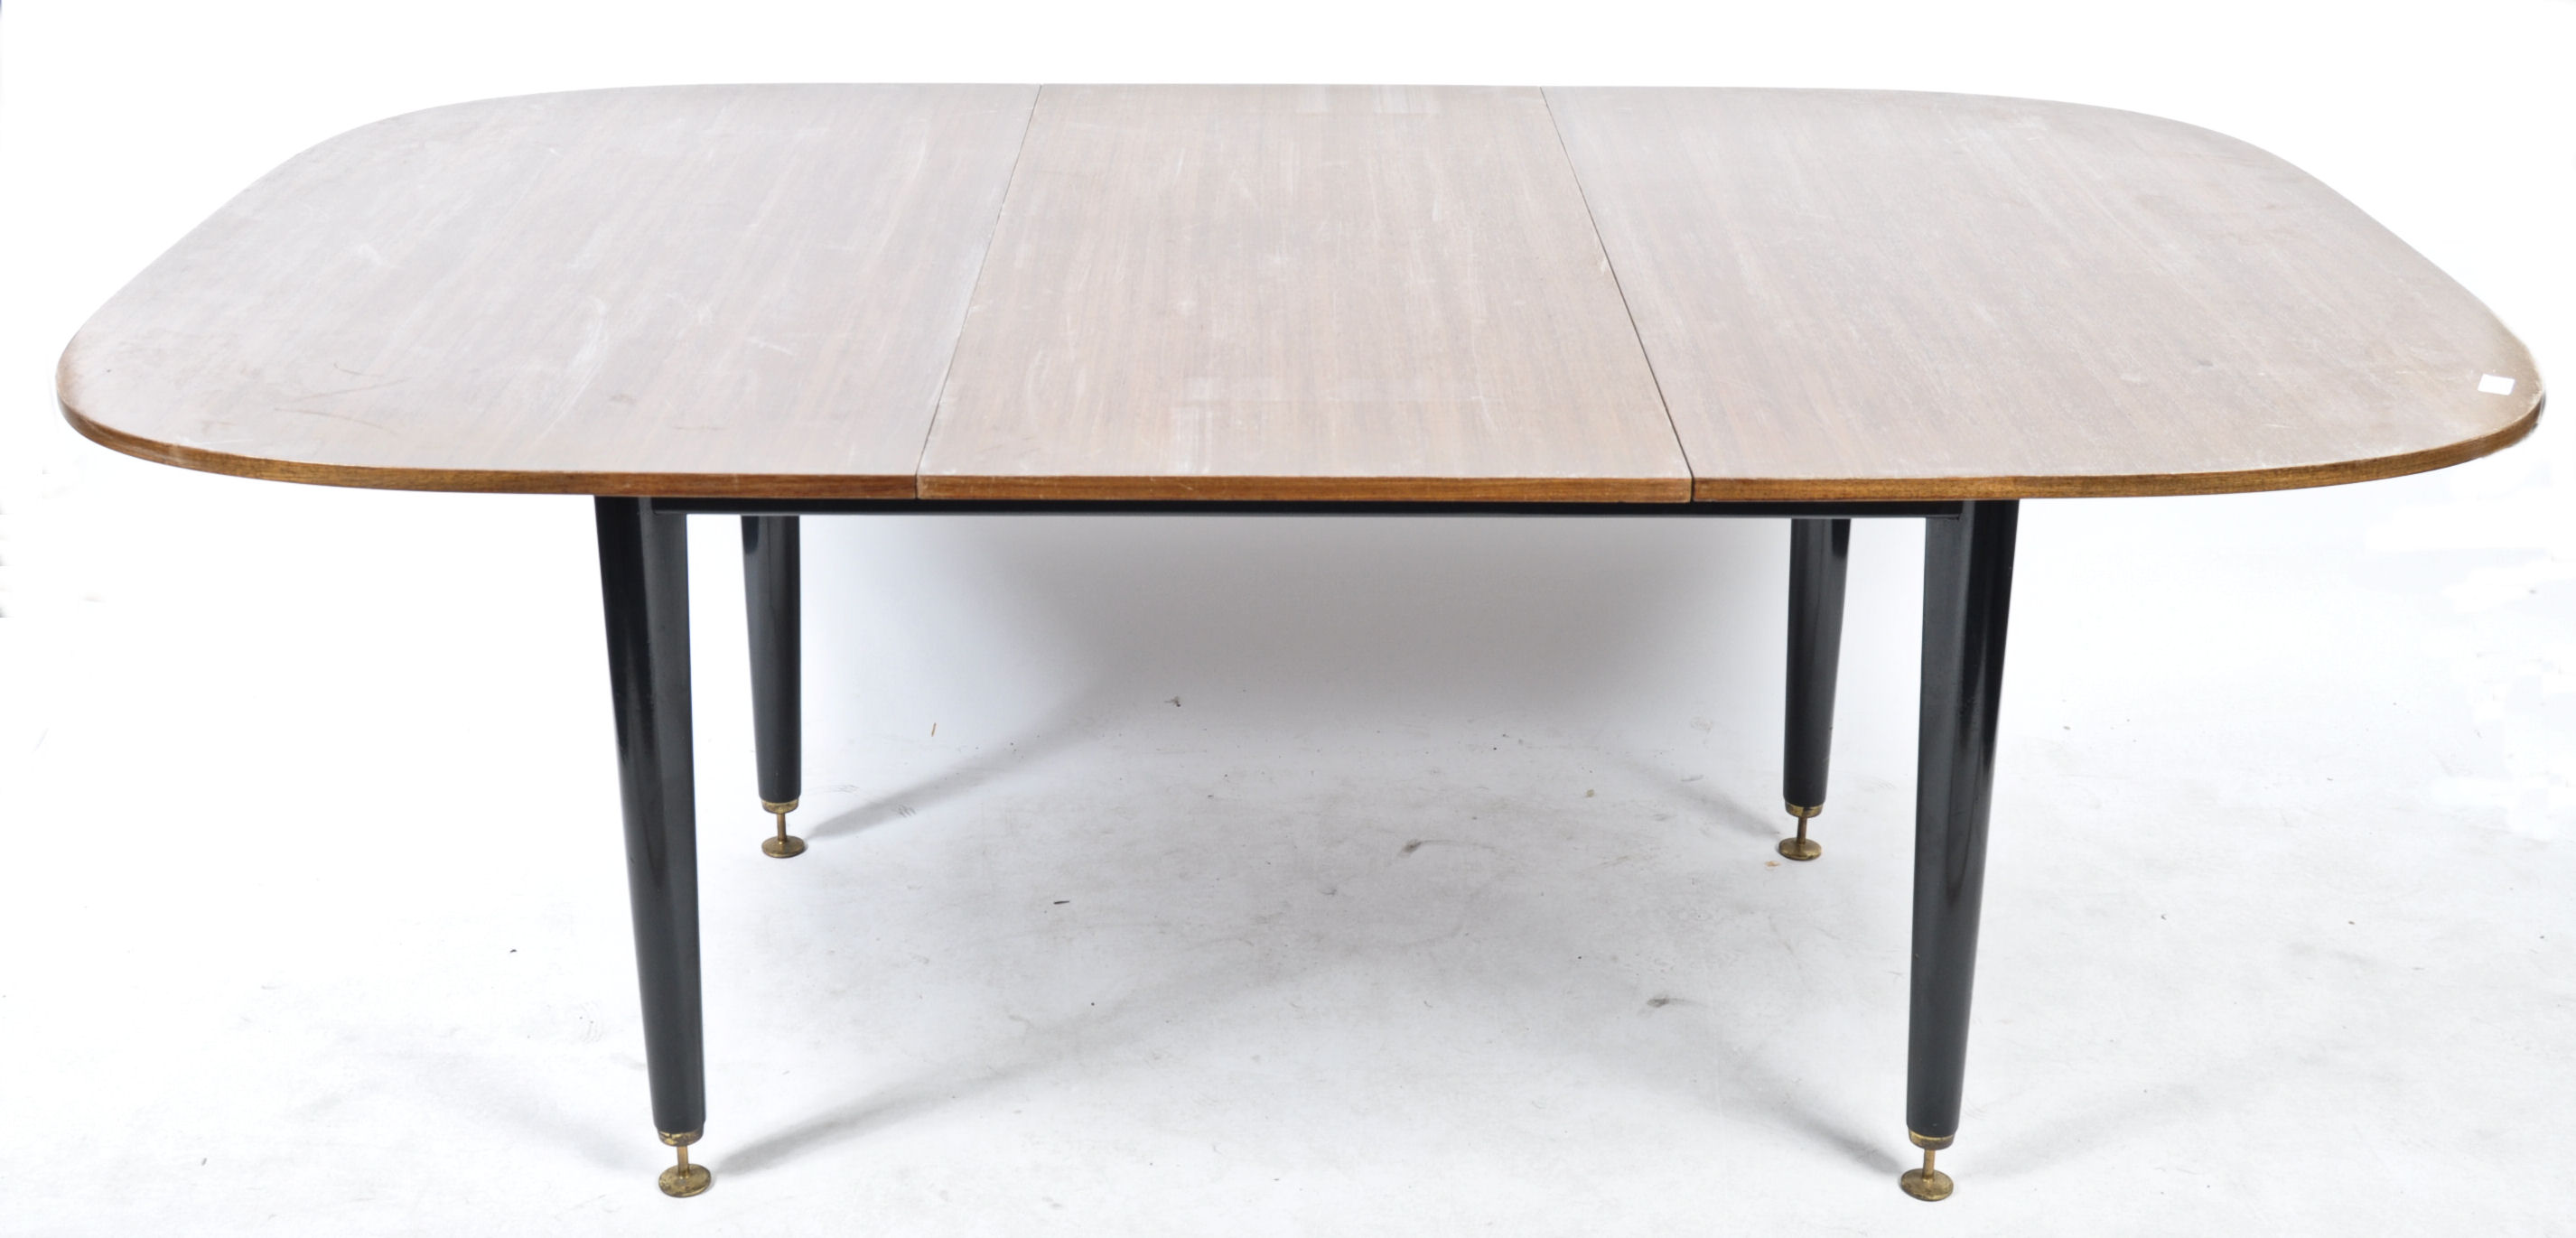 ERNEST GOMME FOR G-PLAN LIBRENZA PATTERN DINING TABLE - Image 5 of 5